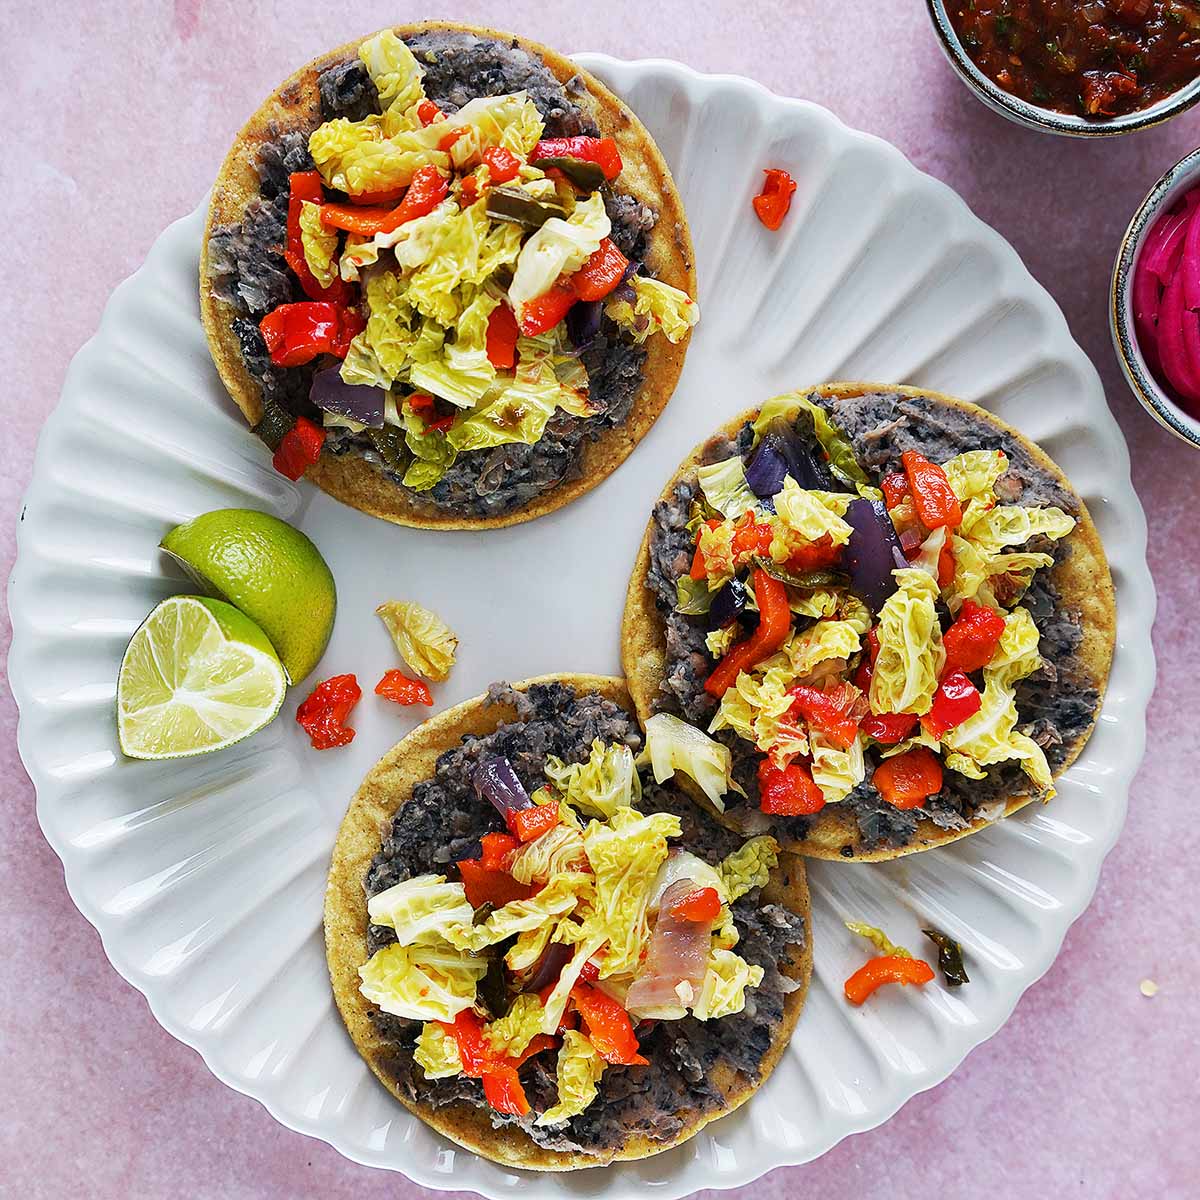 Three corn tostadas loaded with black beans and roasted vegetables.